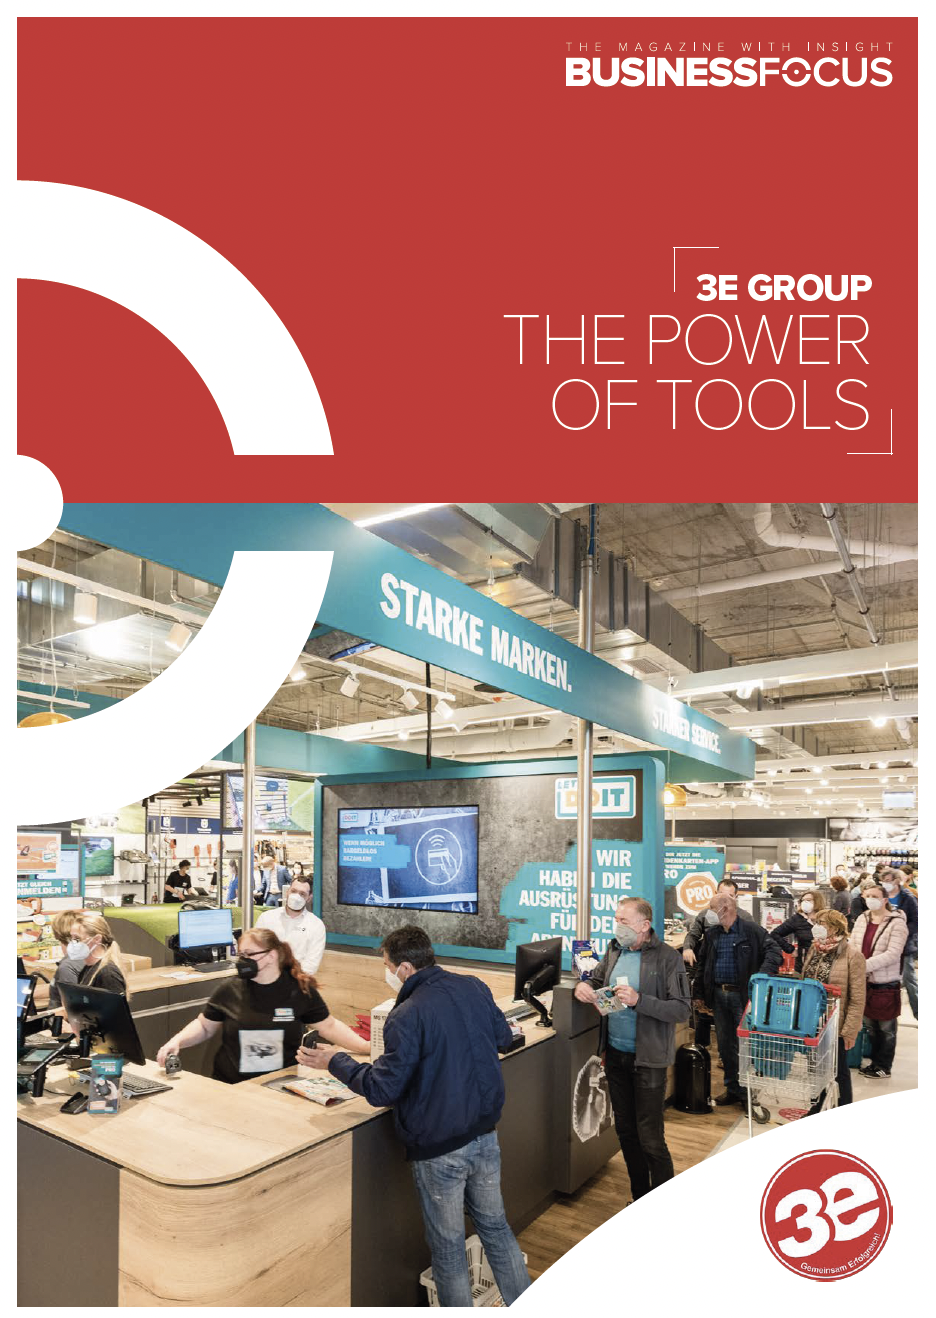 Document download: 3e Group - the power of tools